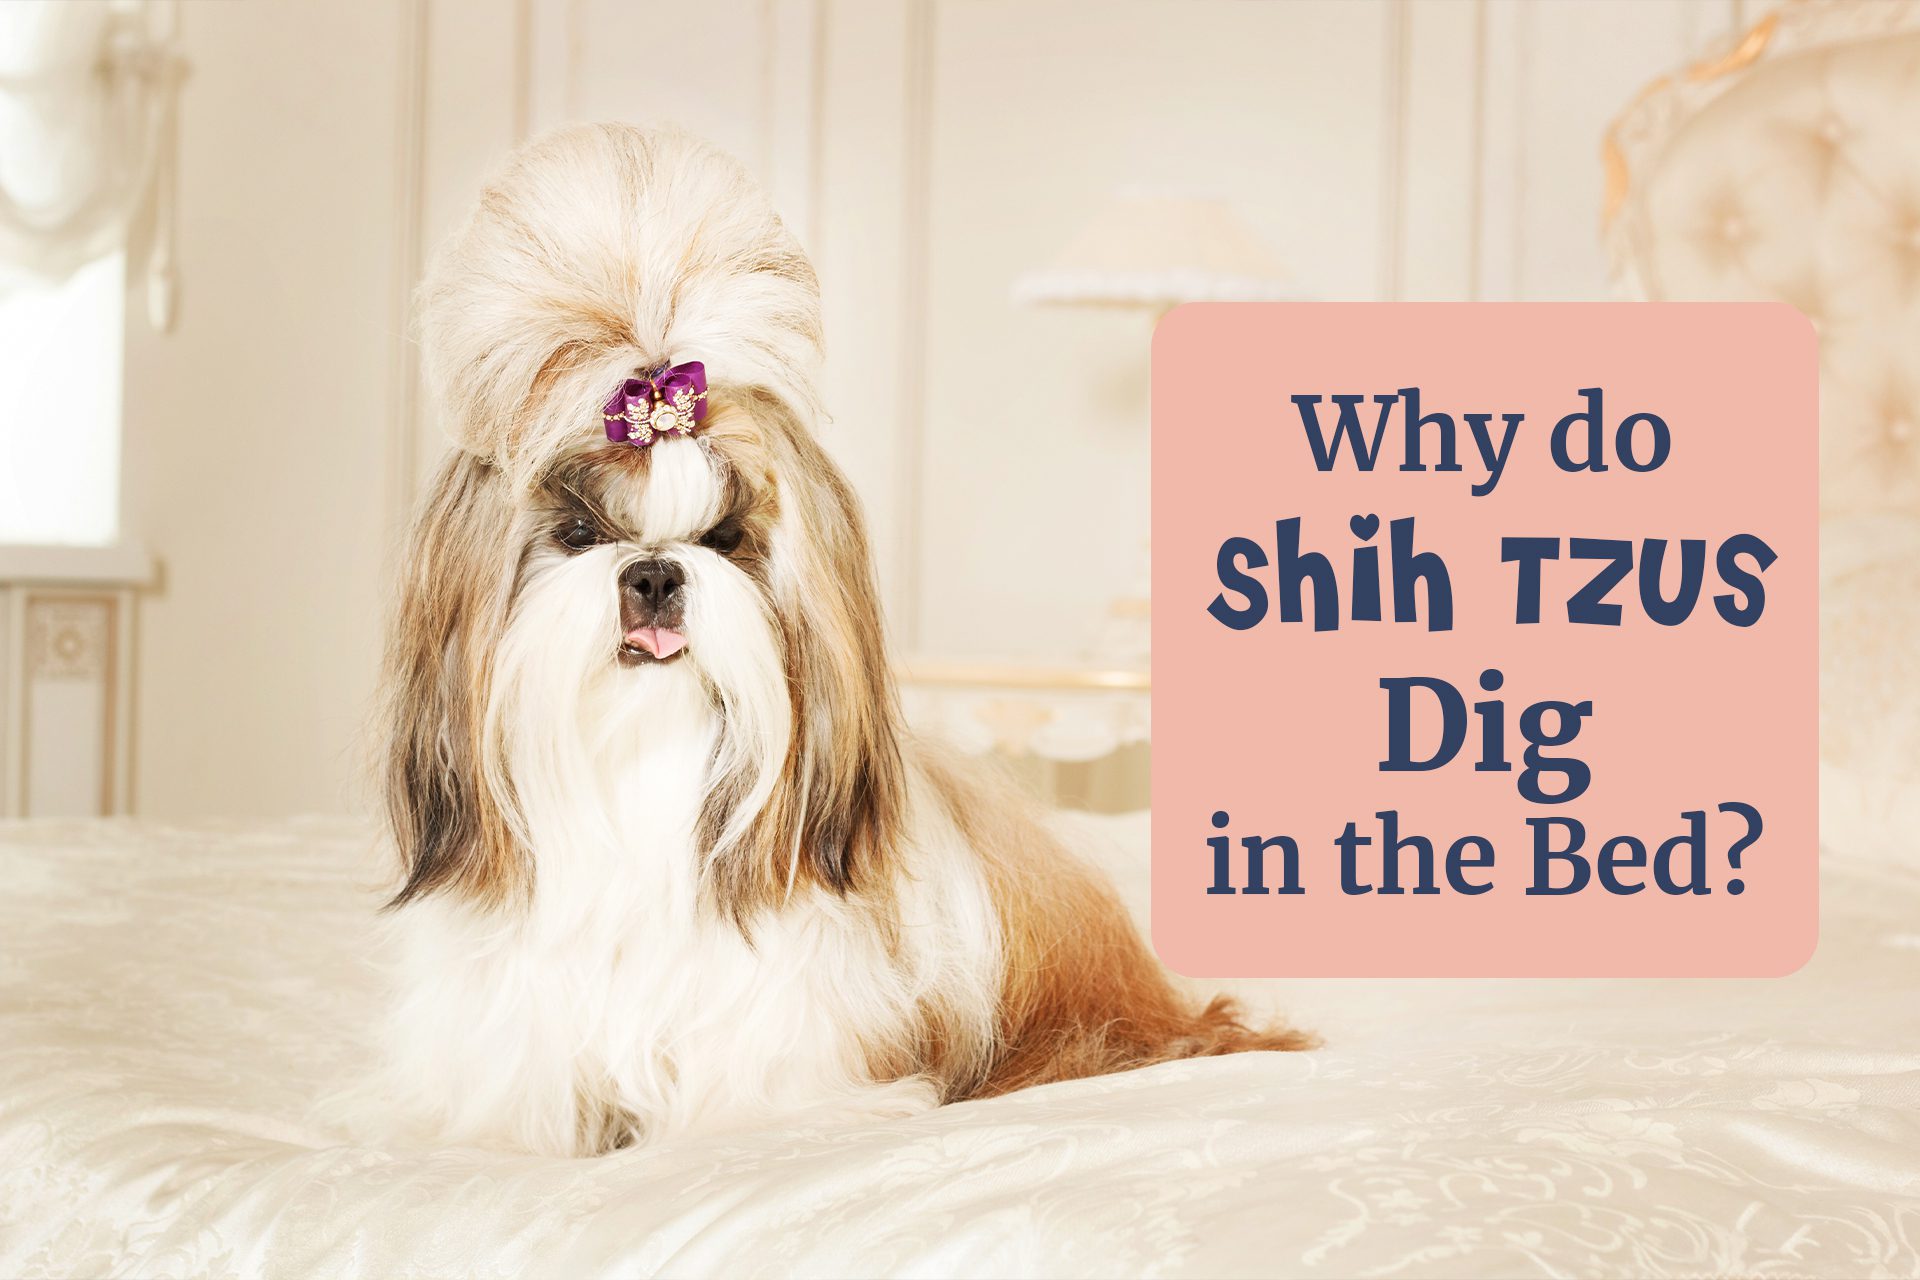 Why do Shih Tzus dig in the bed? there are several reasons that can relate to your dog.